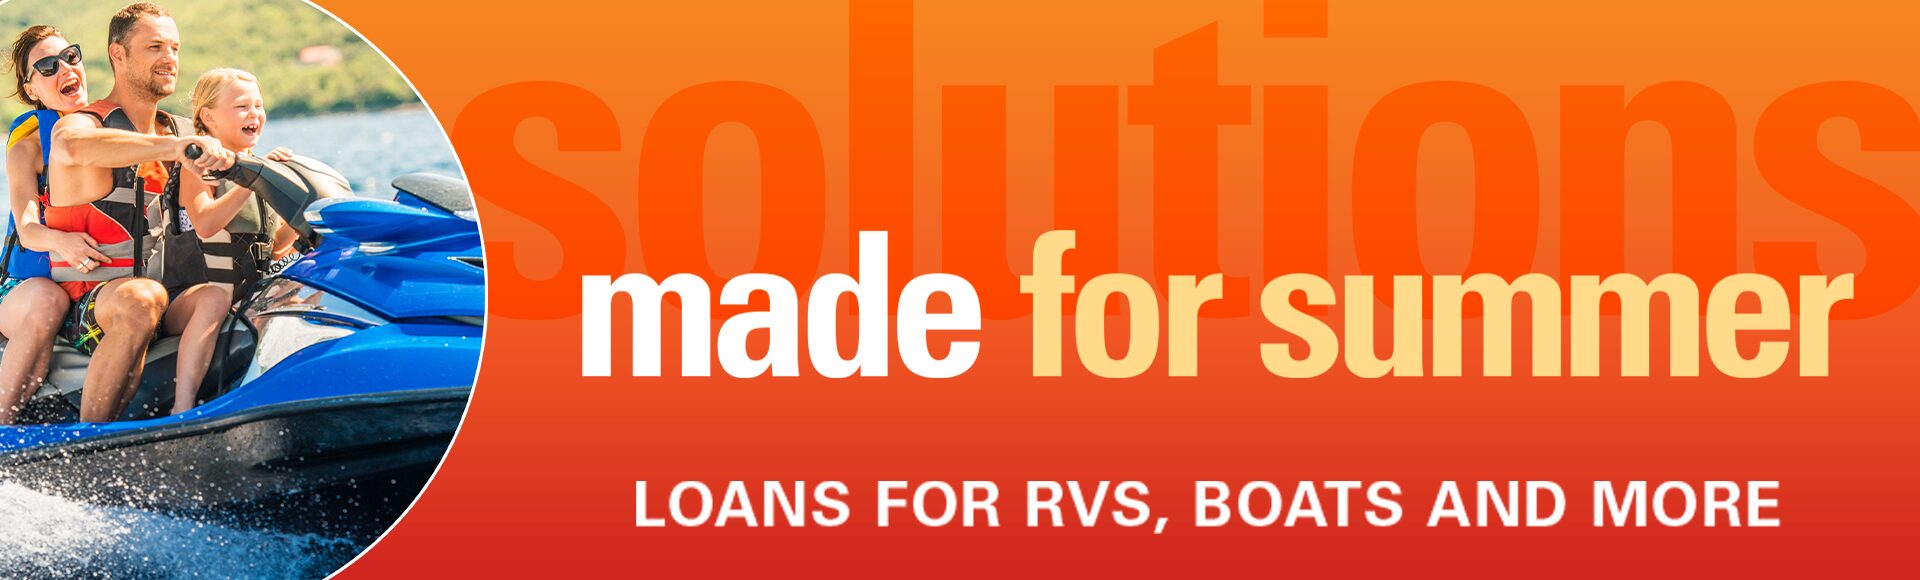 Text reads "Solutions made for summer. Loans for RVs, boats, and more"